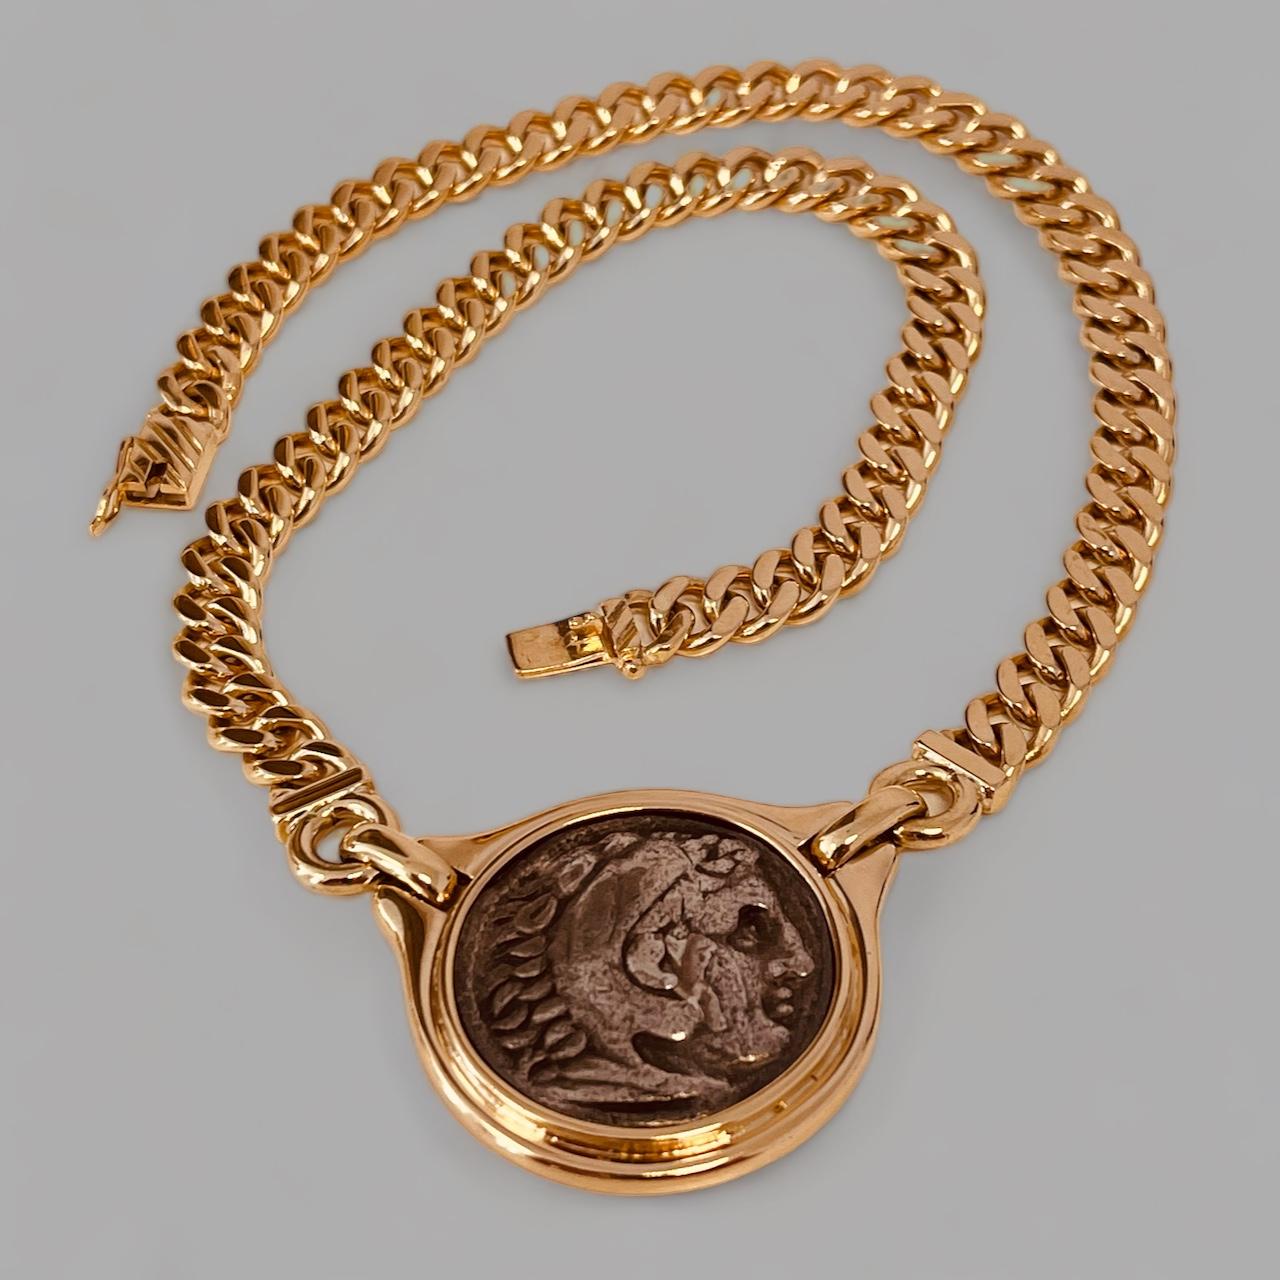 18ct Gold Link Necklace Centring A Reproduction Of An Antique Greek Silver Coin For Sale 7